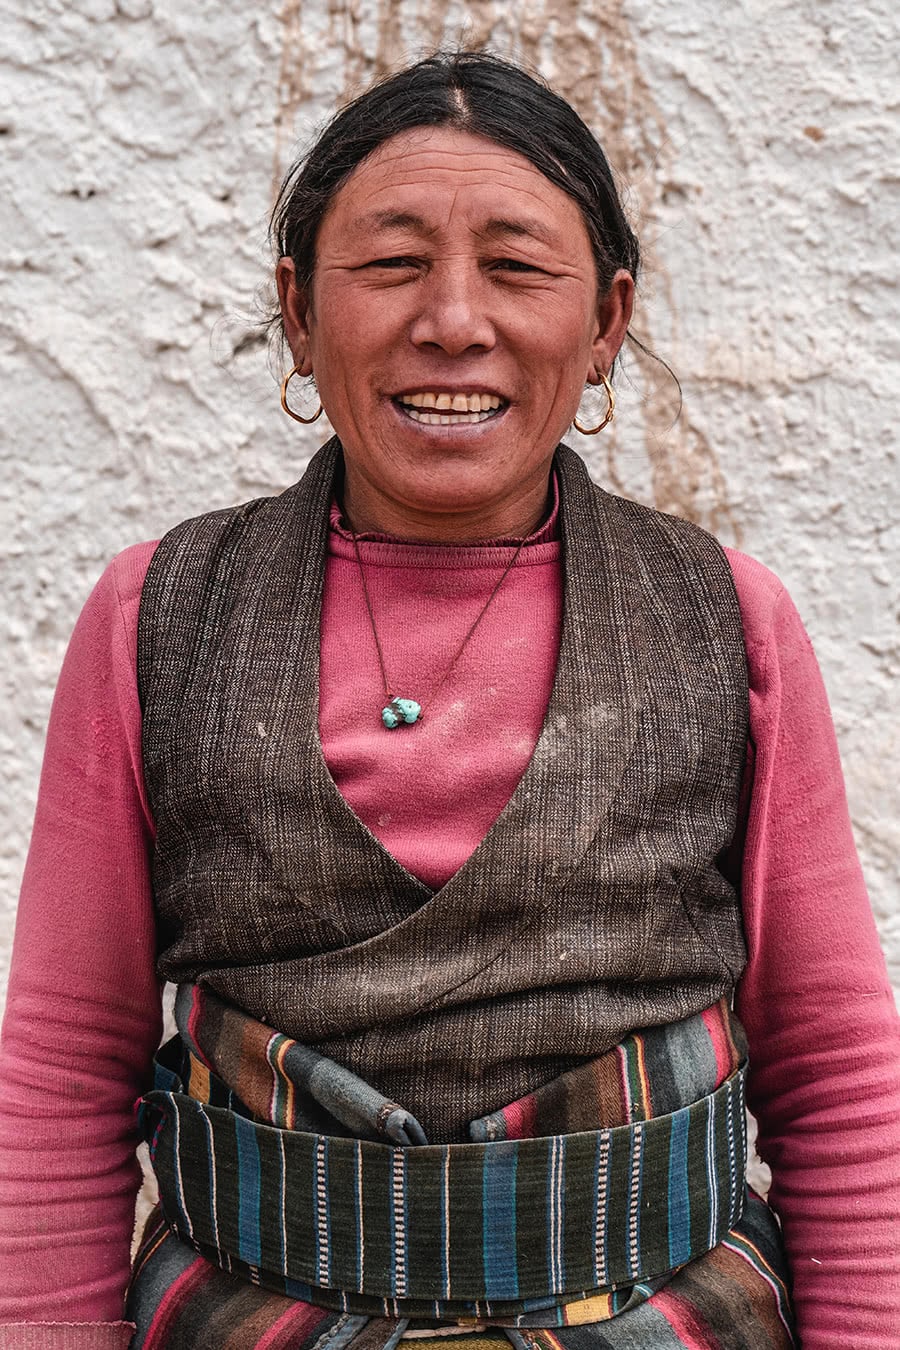 A woman from Upper Mustang, Nepal.